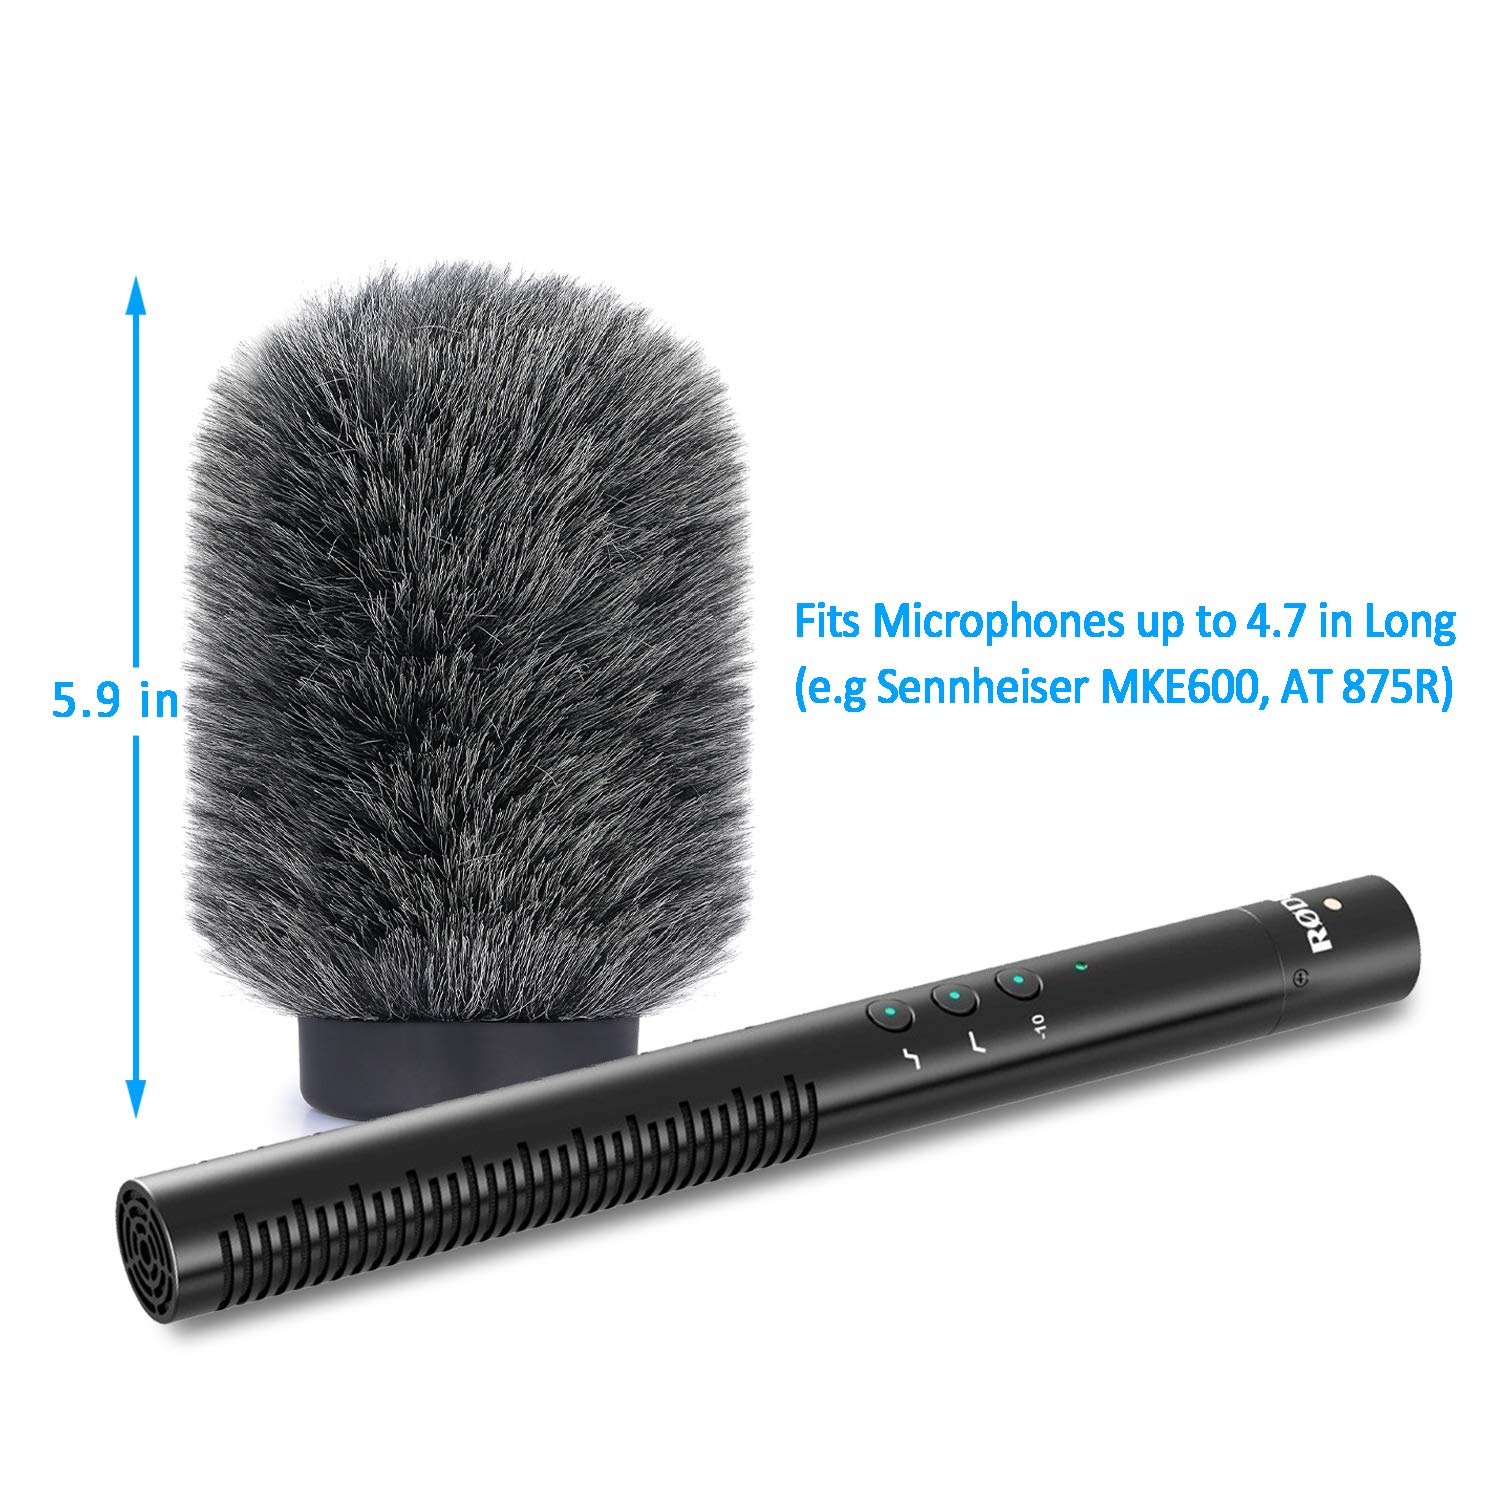 YOUSHARES Deadcat Wind Muff for Rode NTG4,MKE 600 Shotgun Microphones, Audio-Technica AT875R Shotgun Microphones, Windscreen Up to 4.7" Long